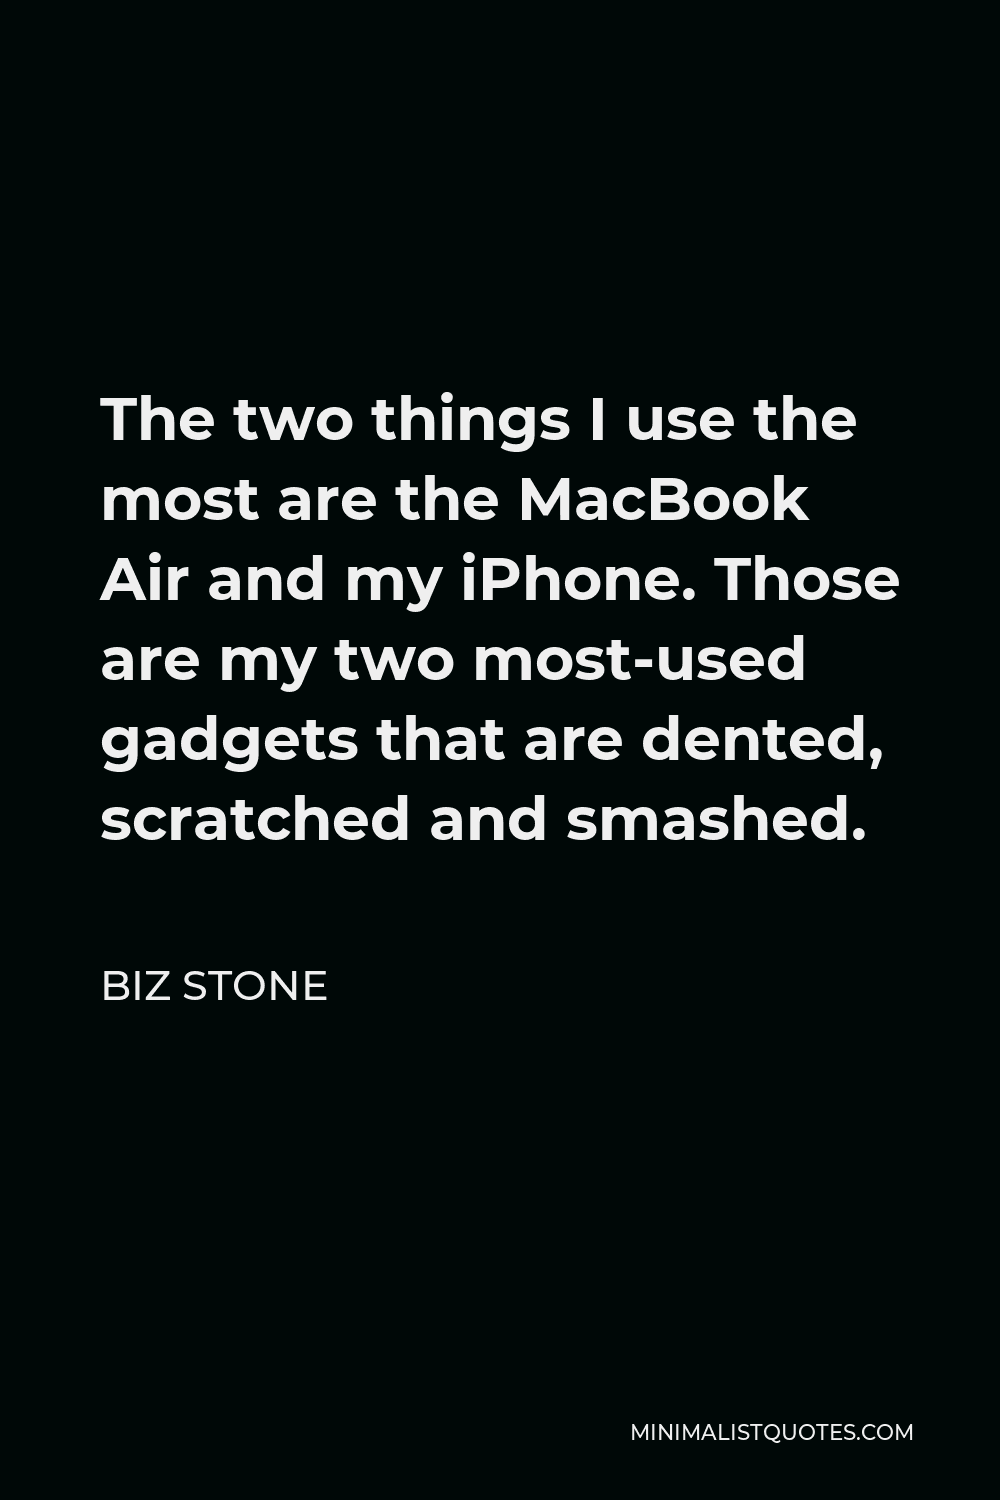 Biz Stone Quote - The two things I use the most are the MacBook Air and my iPhone. Those are my two most-used gadgets that are dented, scratched and smashed.